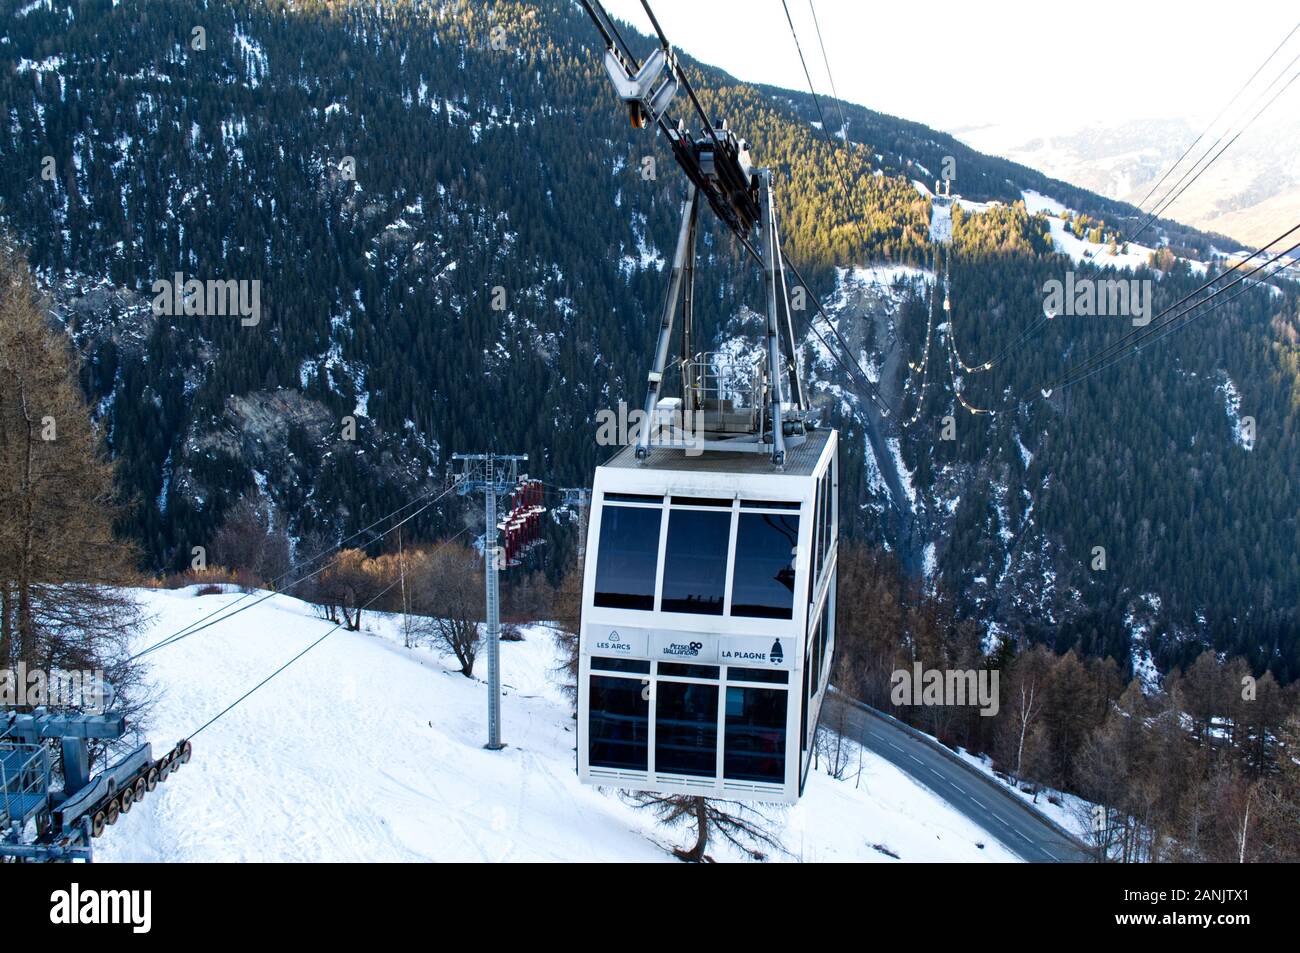 Cable car of the Vanoise Express crossing from La Plagne and about to arrive at the Les Arcs / Plan Peisey side. France Stock Photo